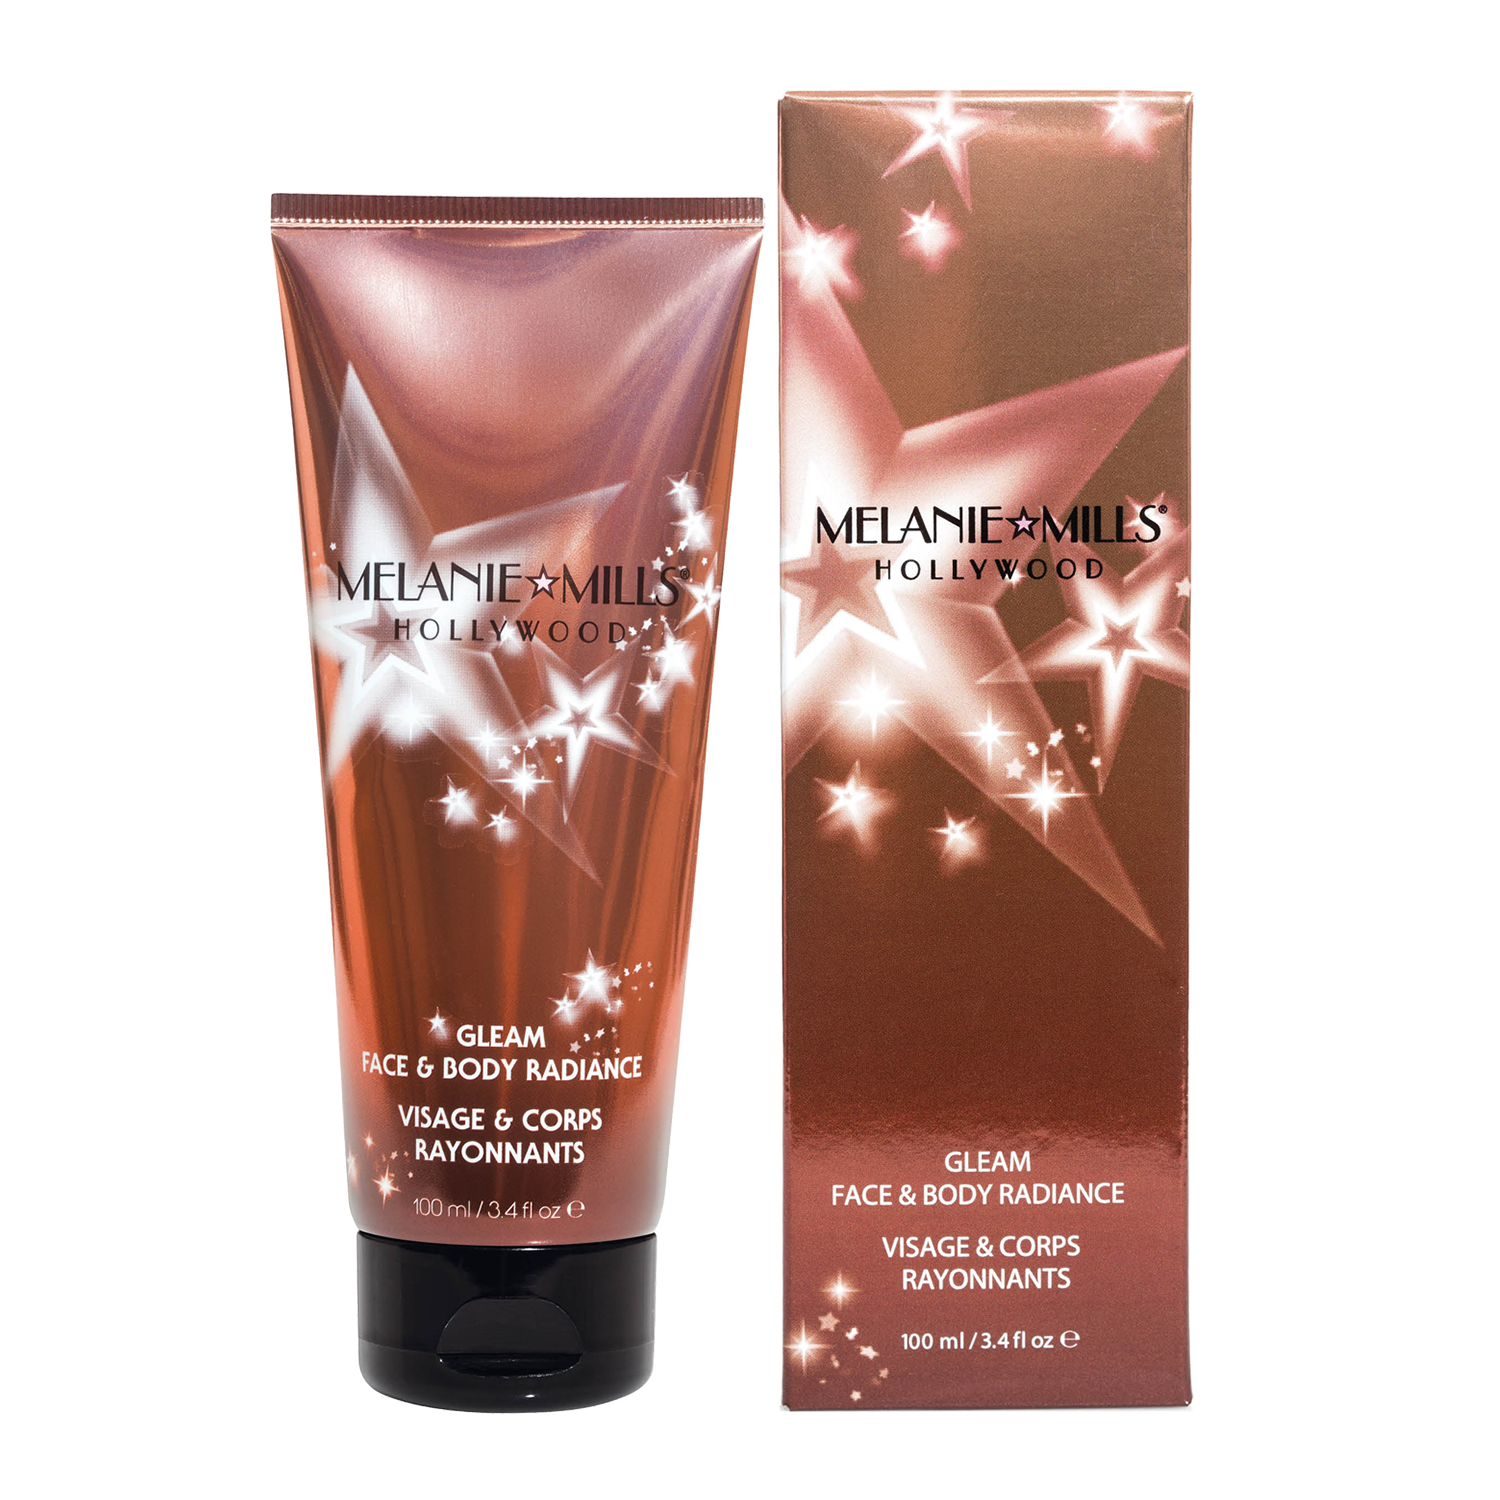 Melanie Mills Hollywood Peach Deluxe Gleam Face & Body Radiance  1